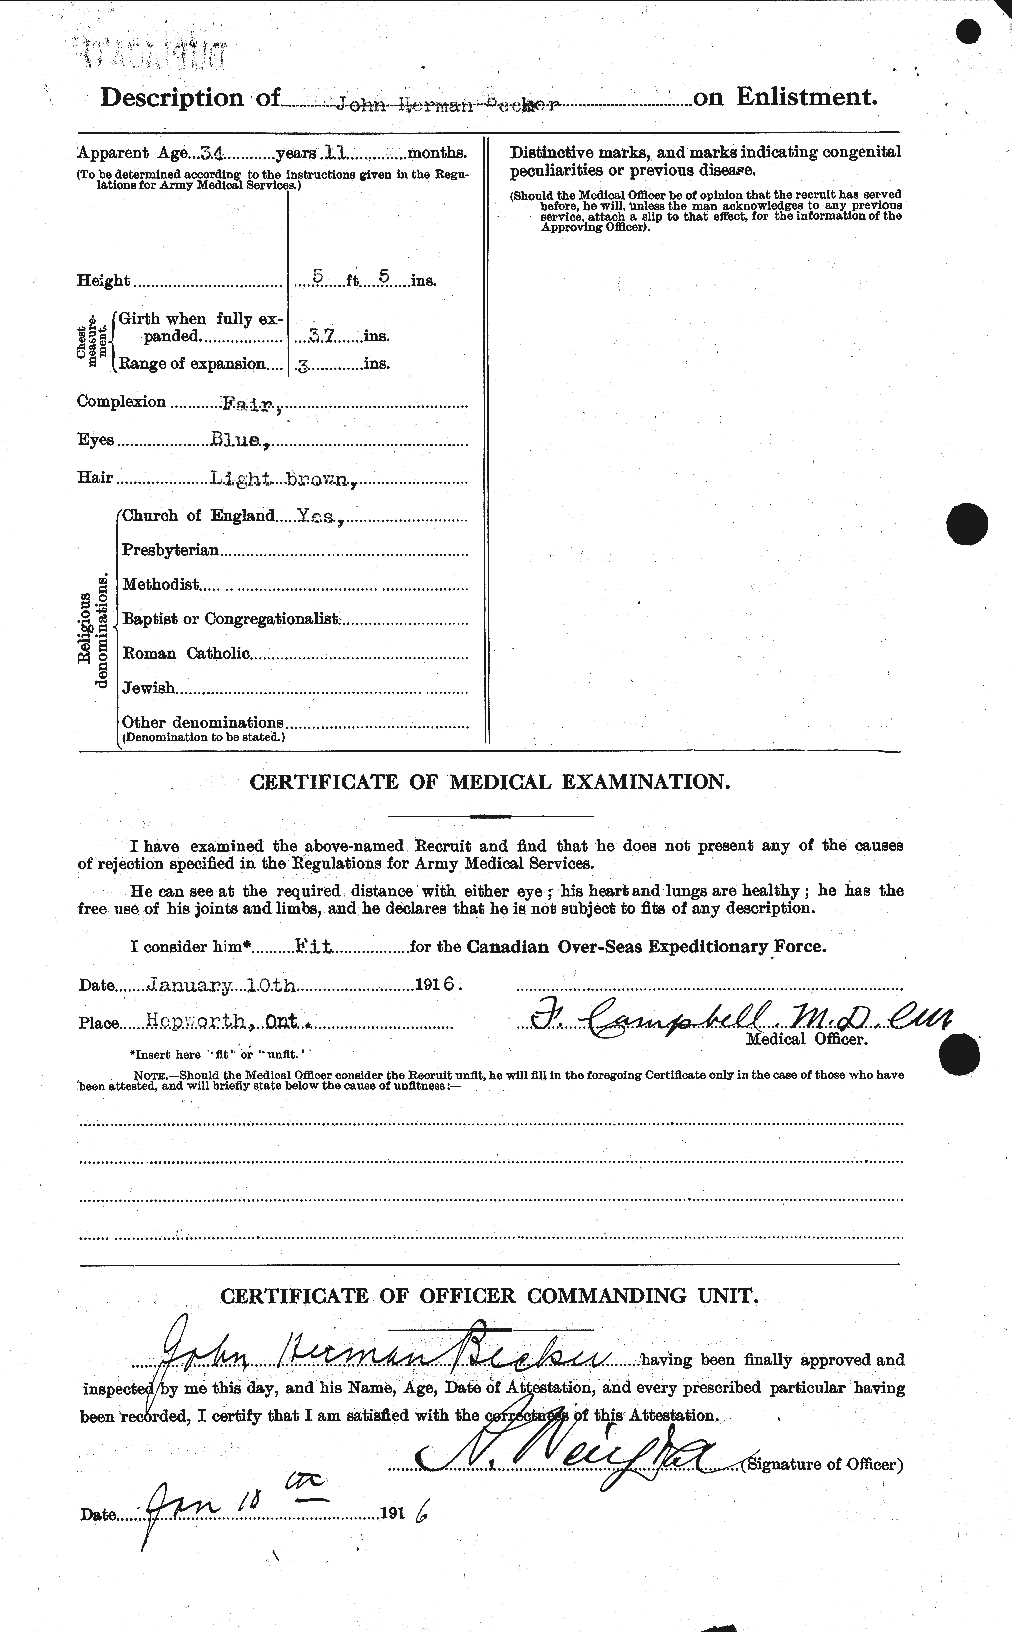 Personnel Records of the First World War - CEF 232298b